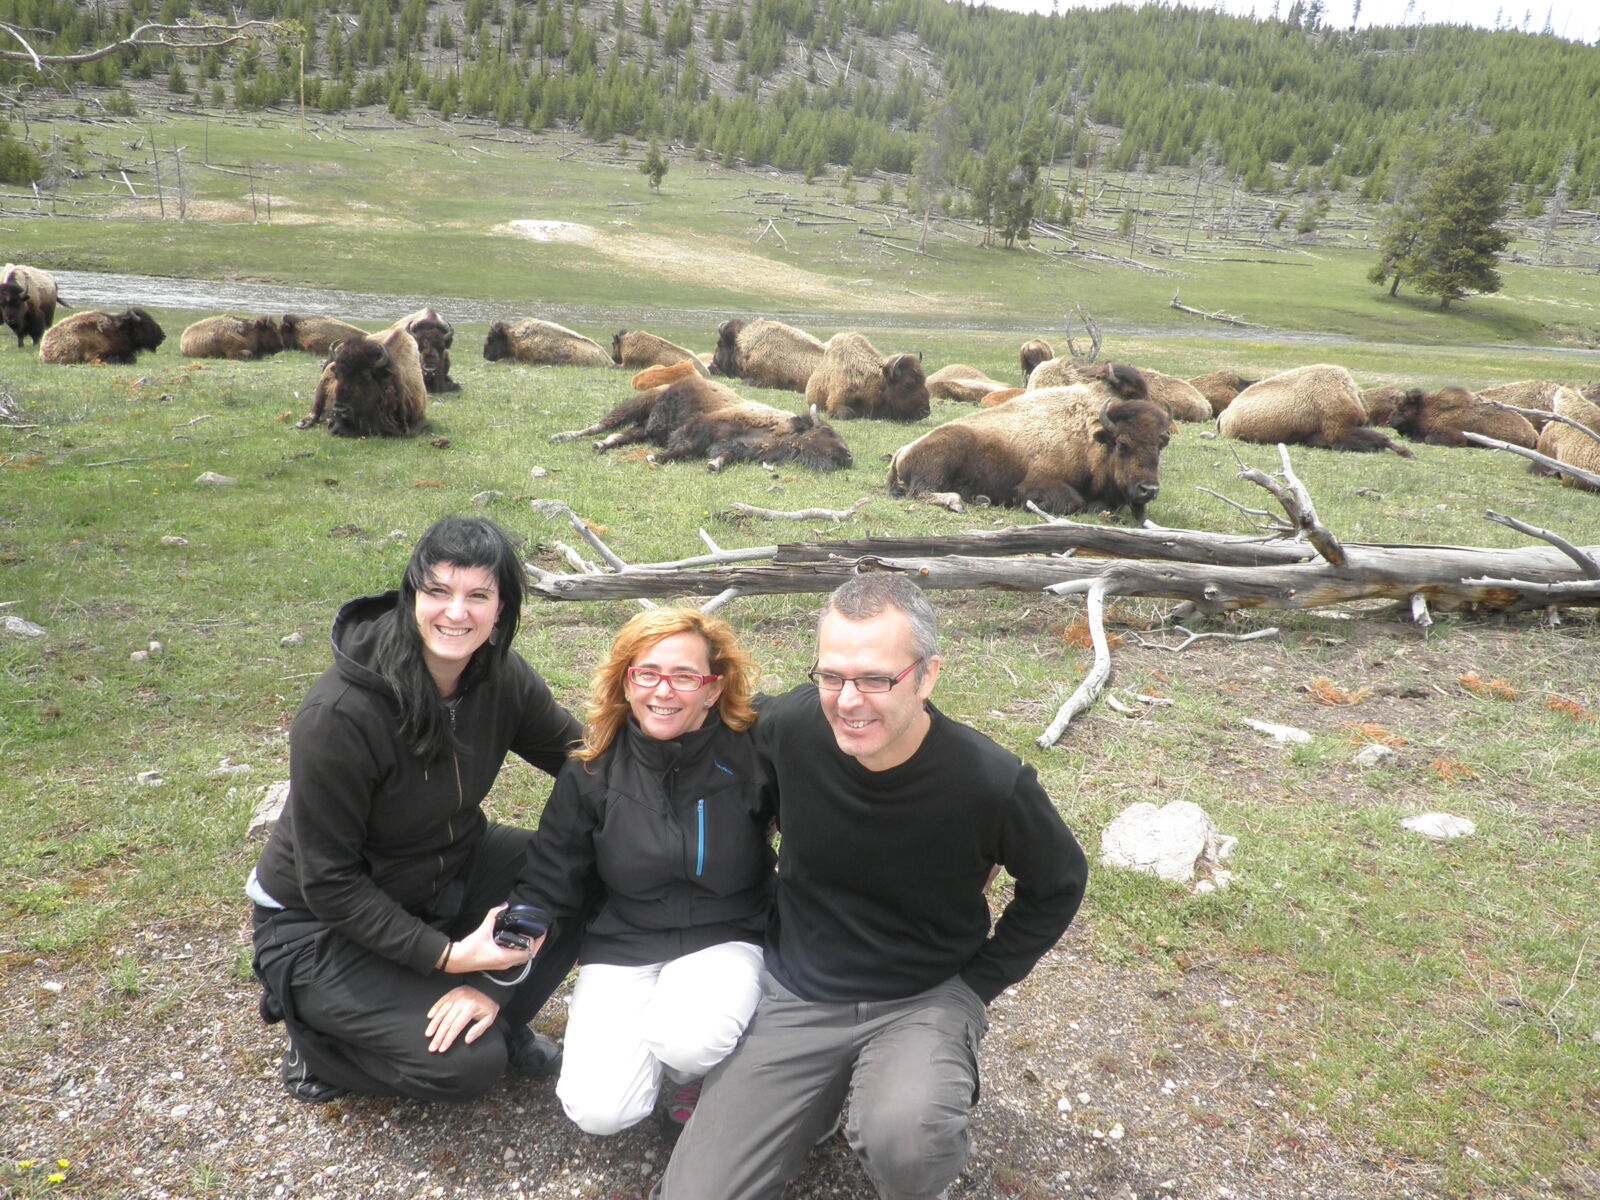 Three people kneel and smile in the foreground with a meadow and a herd of bison resting in the background.